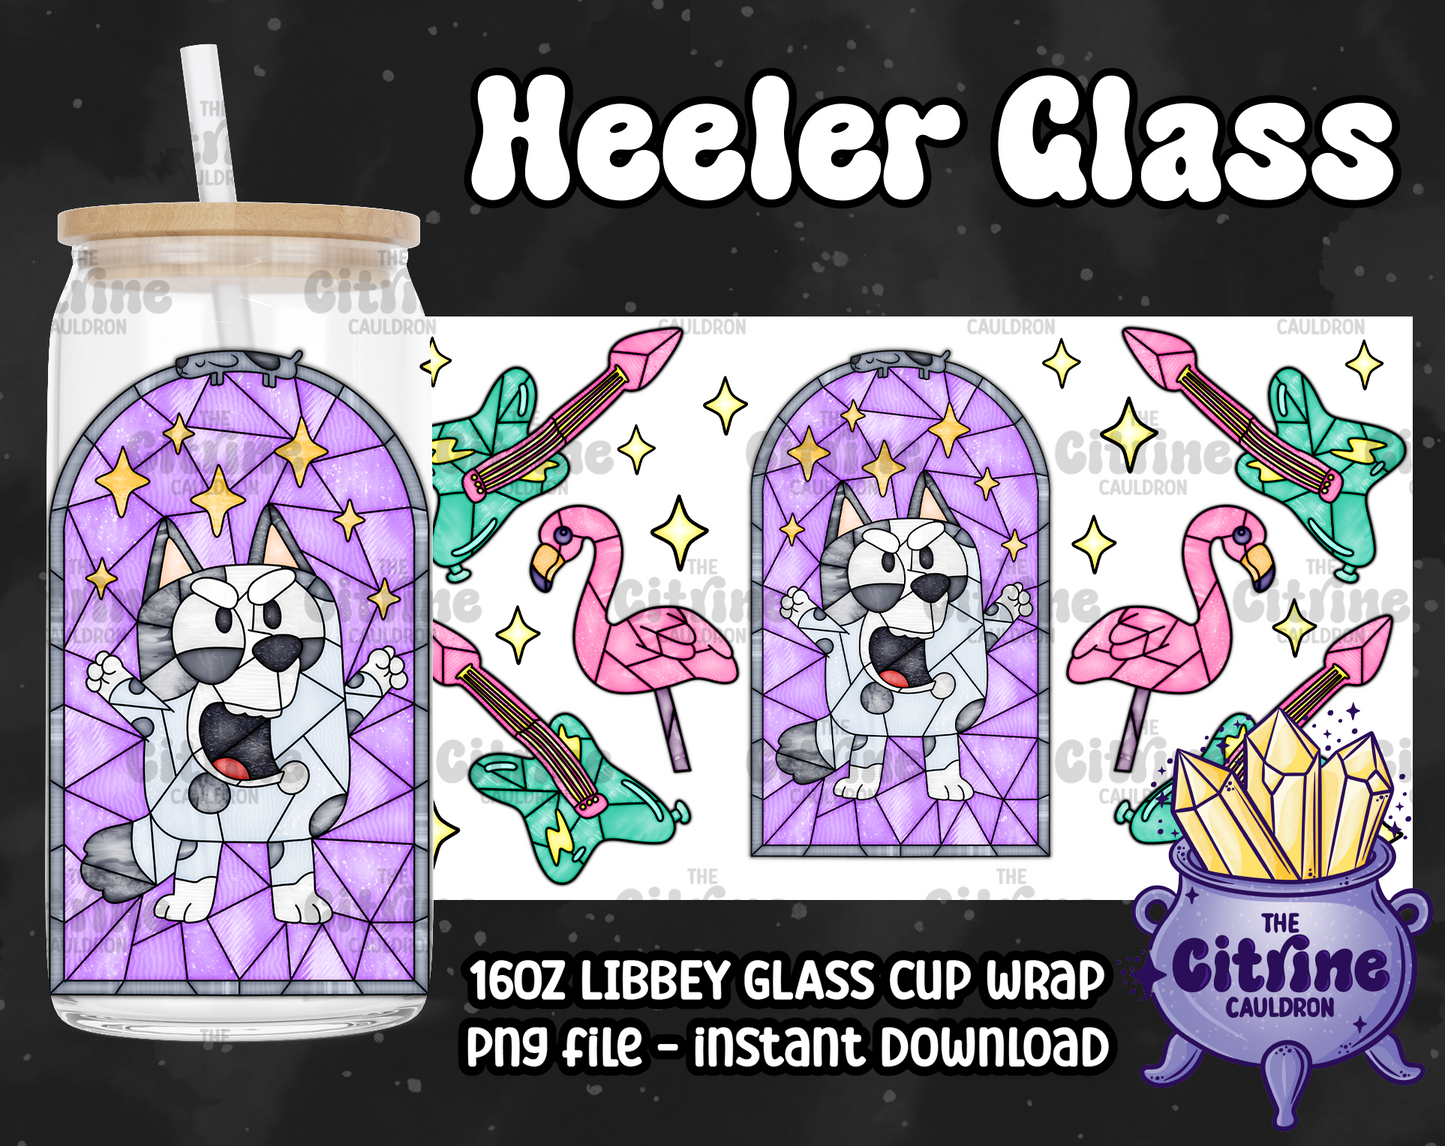 Heeler Glass - PNG Wrap for Libbey 16oz Glass Can